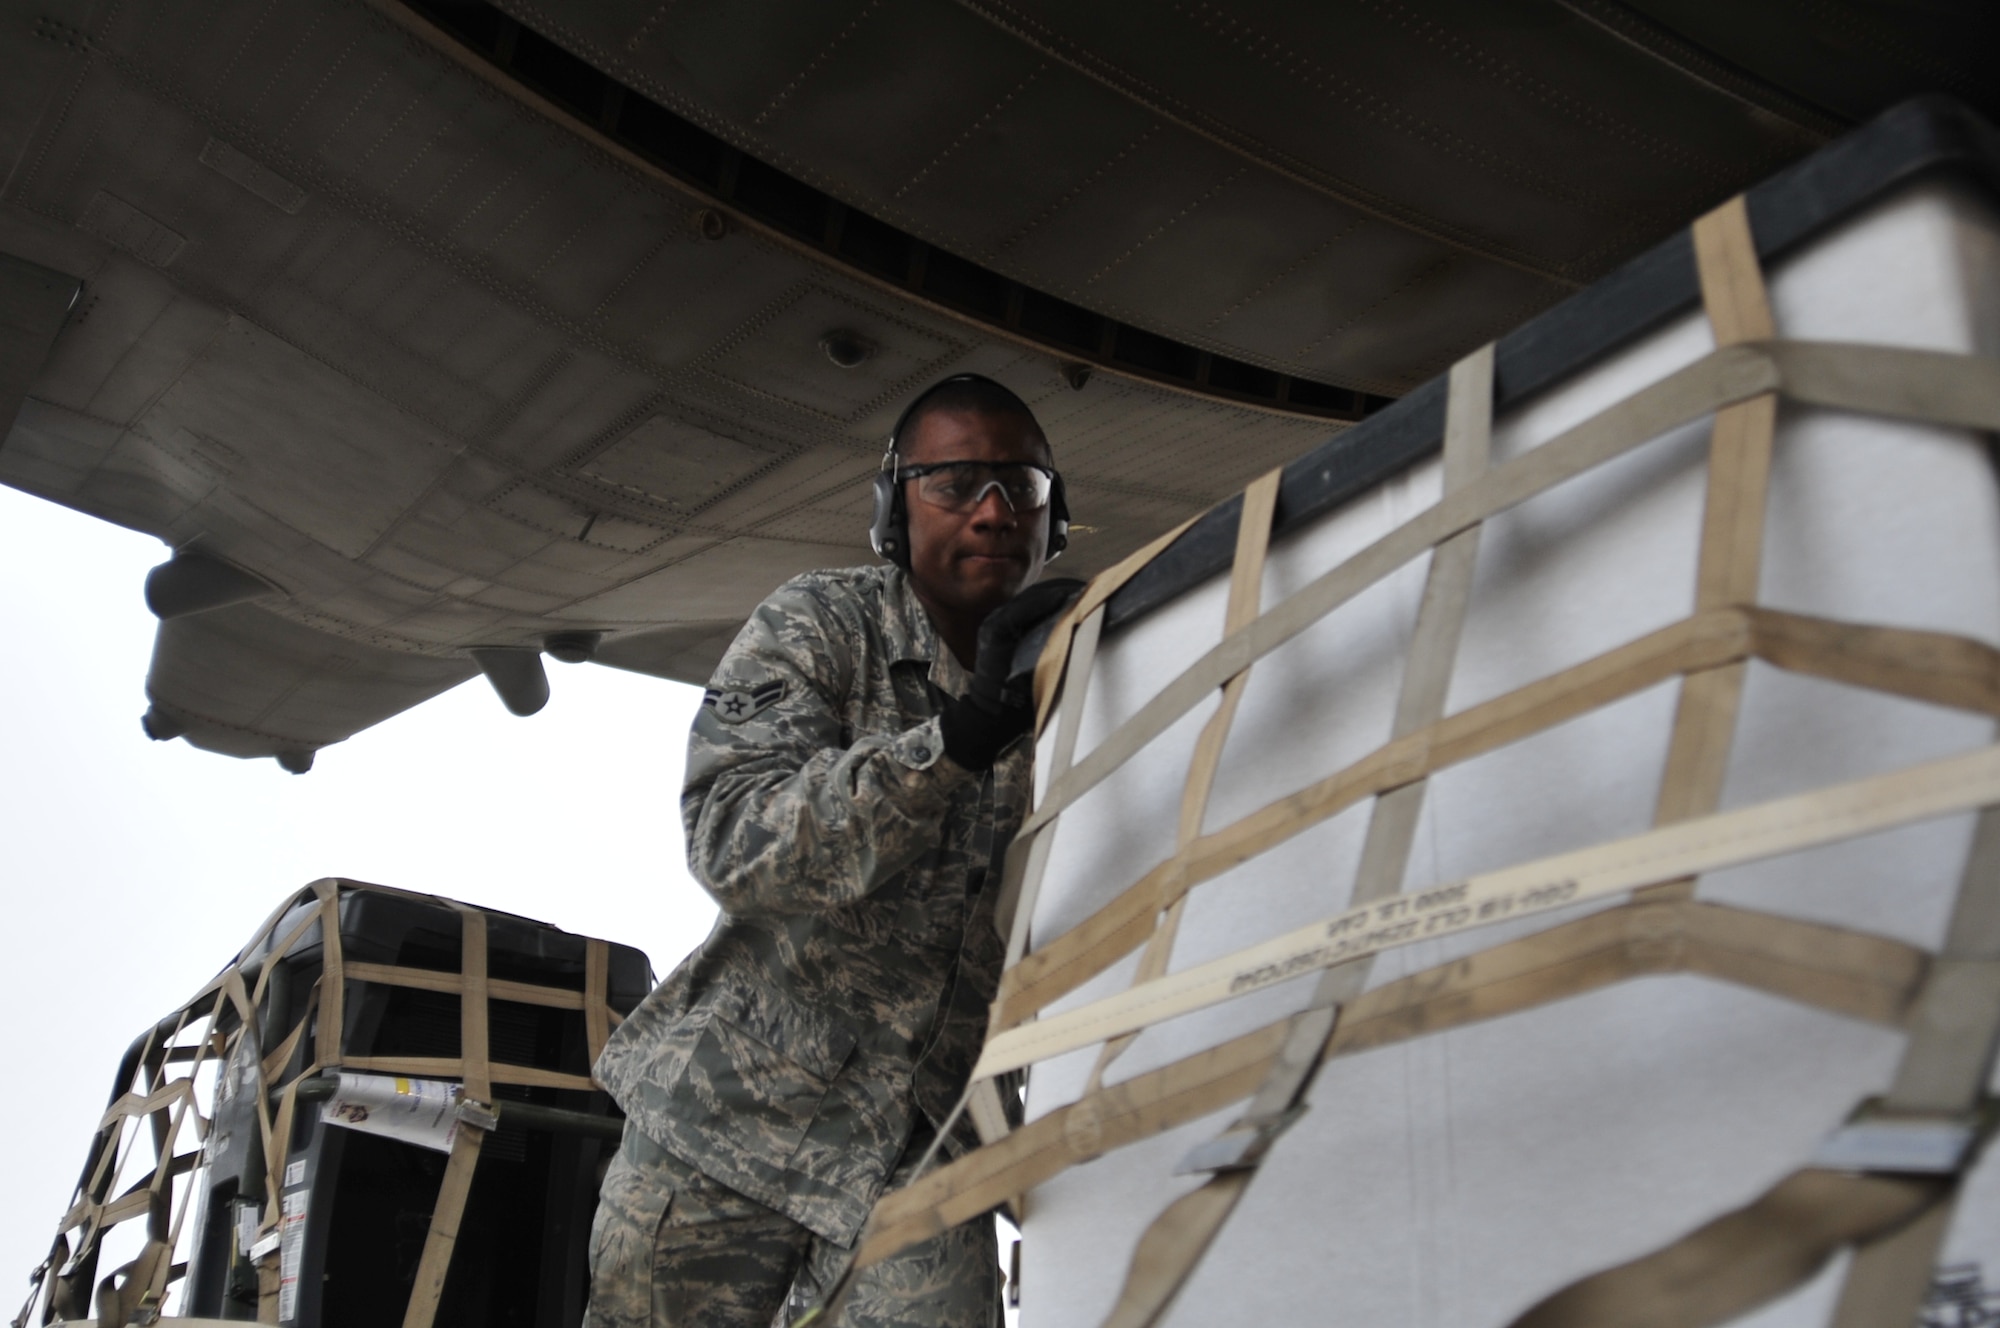 Airman 1st Class Stephen China pushes a pallet of cargo onto a C-130 Hercules, cargo aircraft at Ali Base, Iraq on Aug. 26, 2011.  Airman China is based out of Yokota Air Base, Japan and his hometown is Sumter, SC. (U.S. Air Force photo/Master Sgt. Cecilio Ricardo)